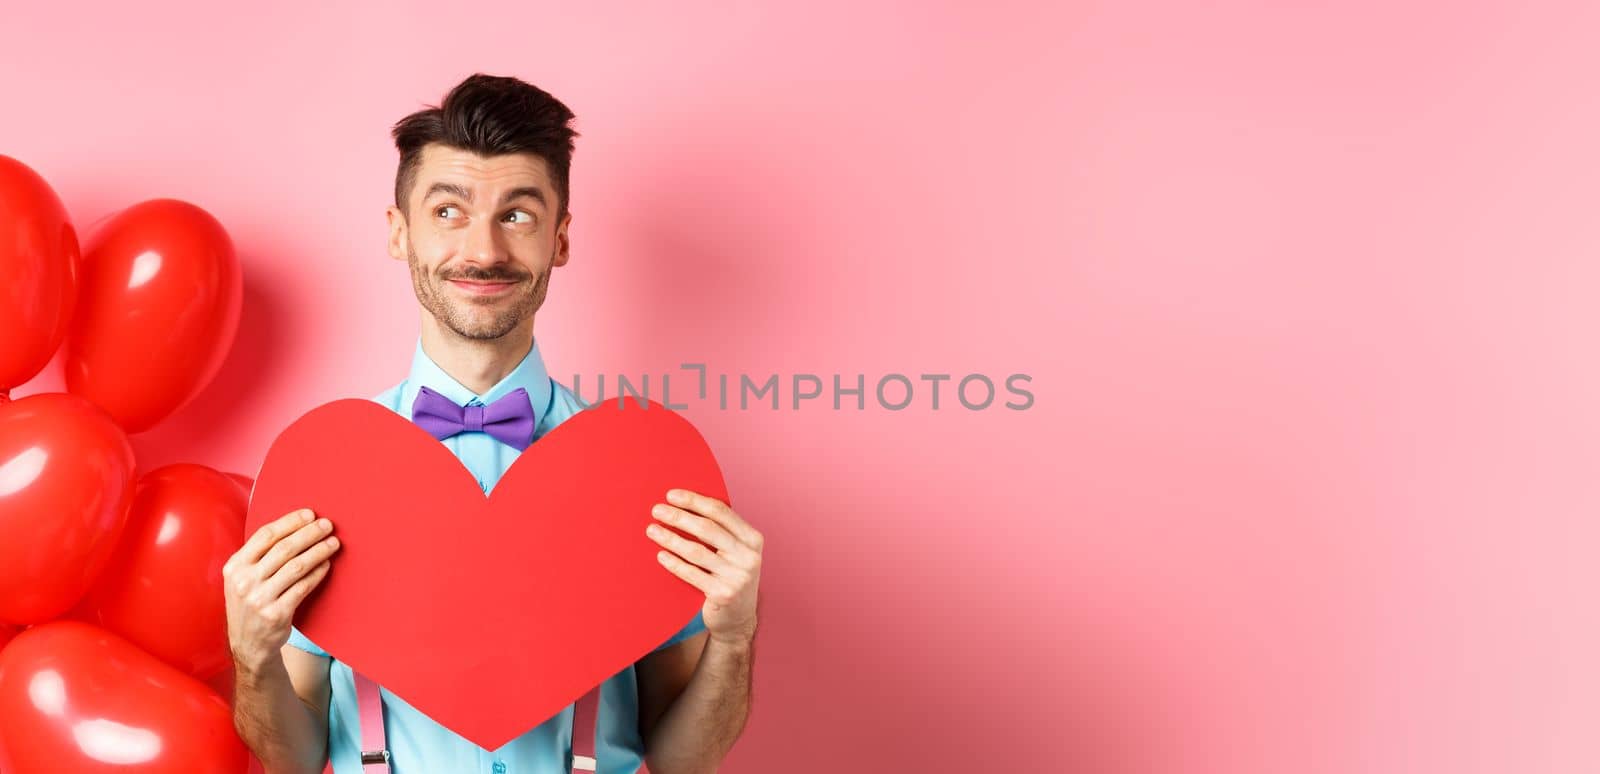 Valentines day concept. Smiling handsome man looking dreamy left, waiting for true love girlfriend with big red heart cutout, standing over pink background.